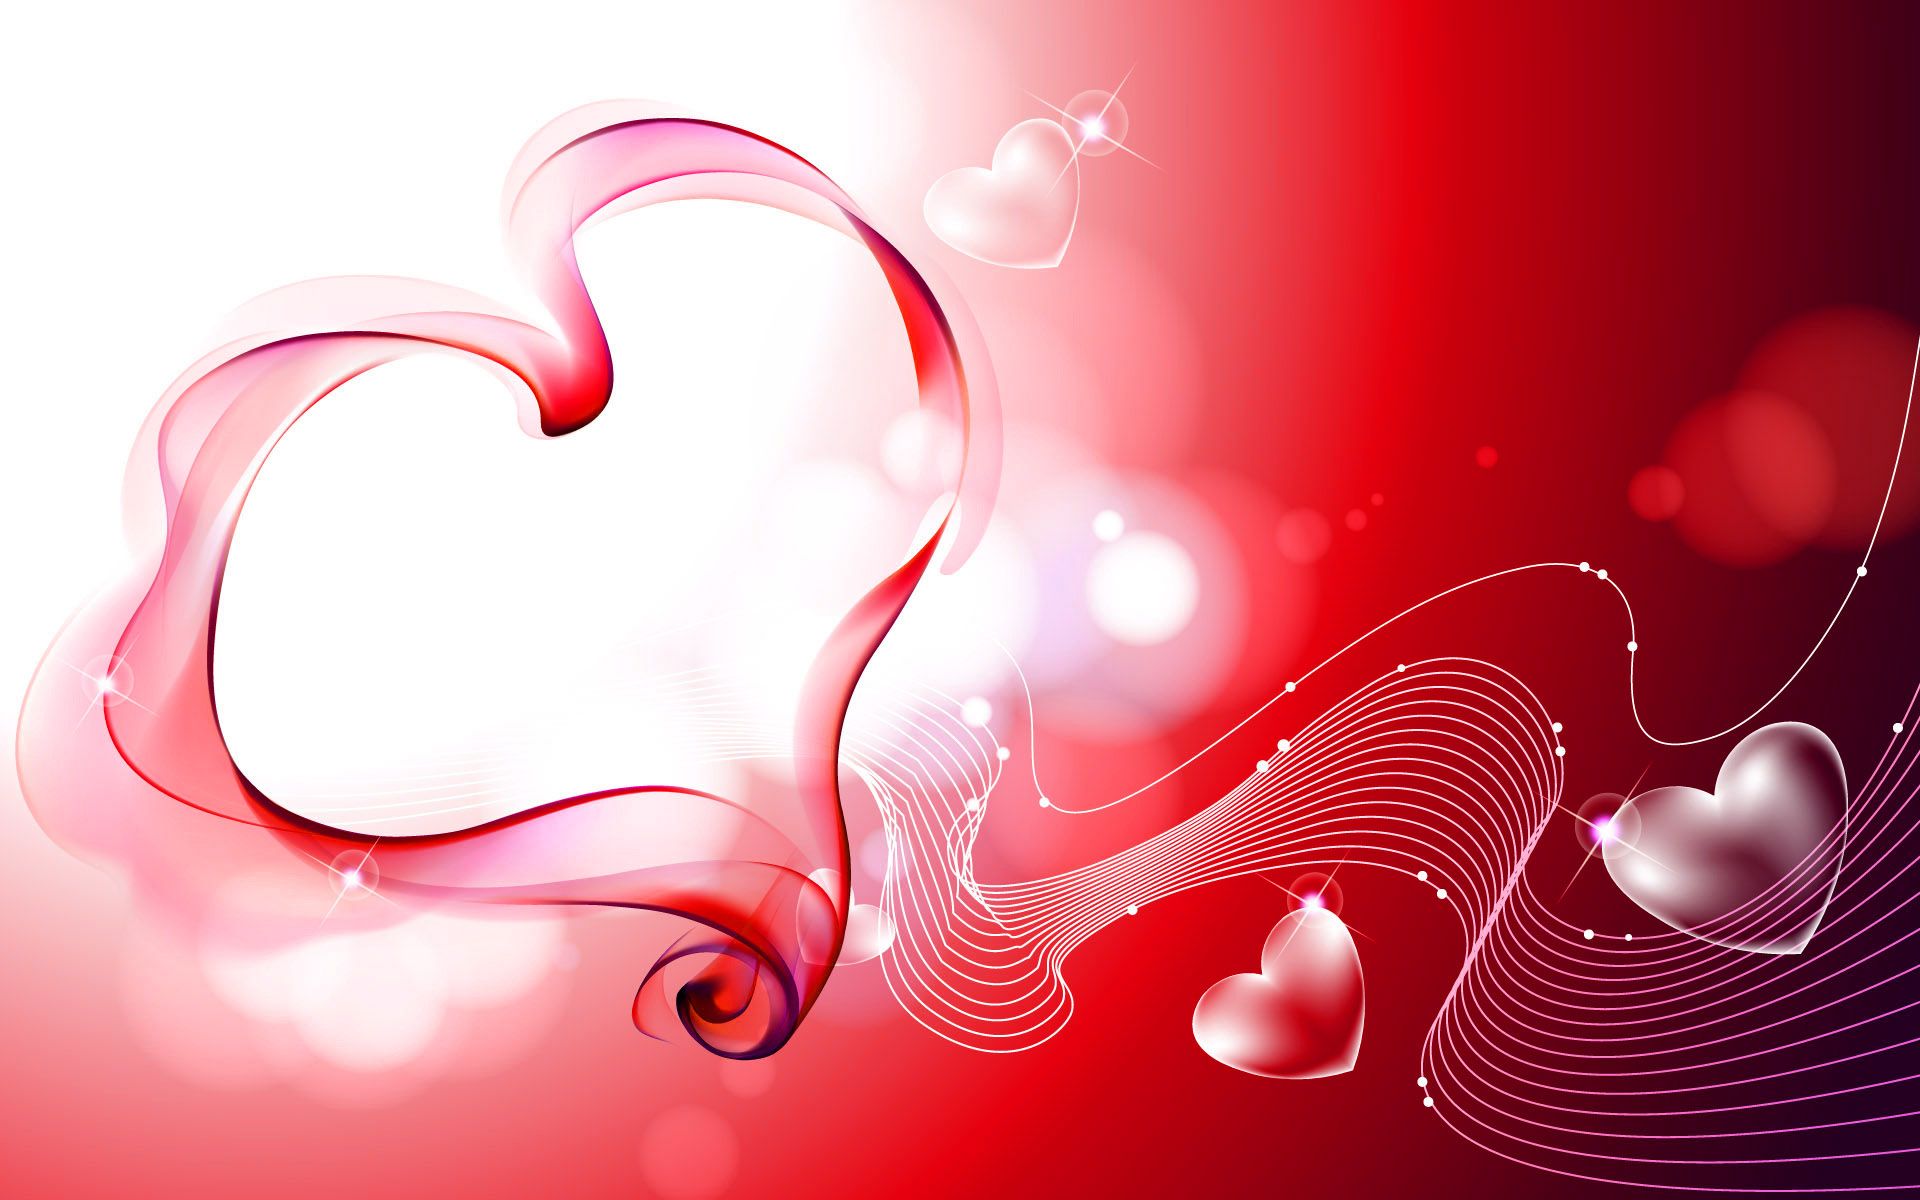 Beautiful Valentine Wallpaper For The Month of Love. Heart